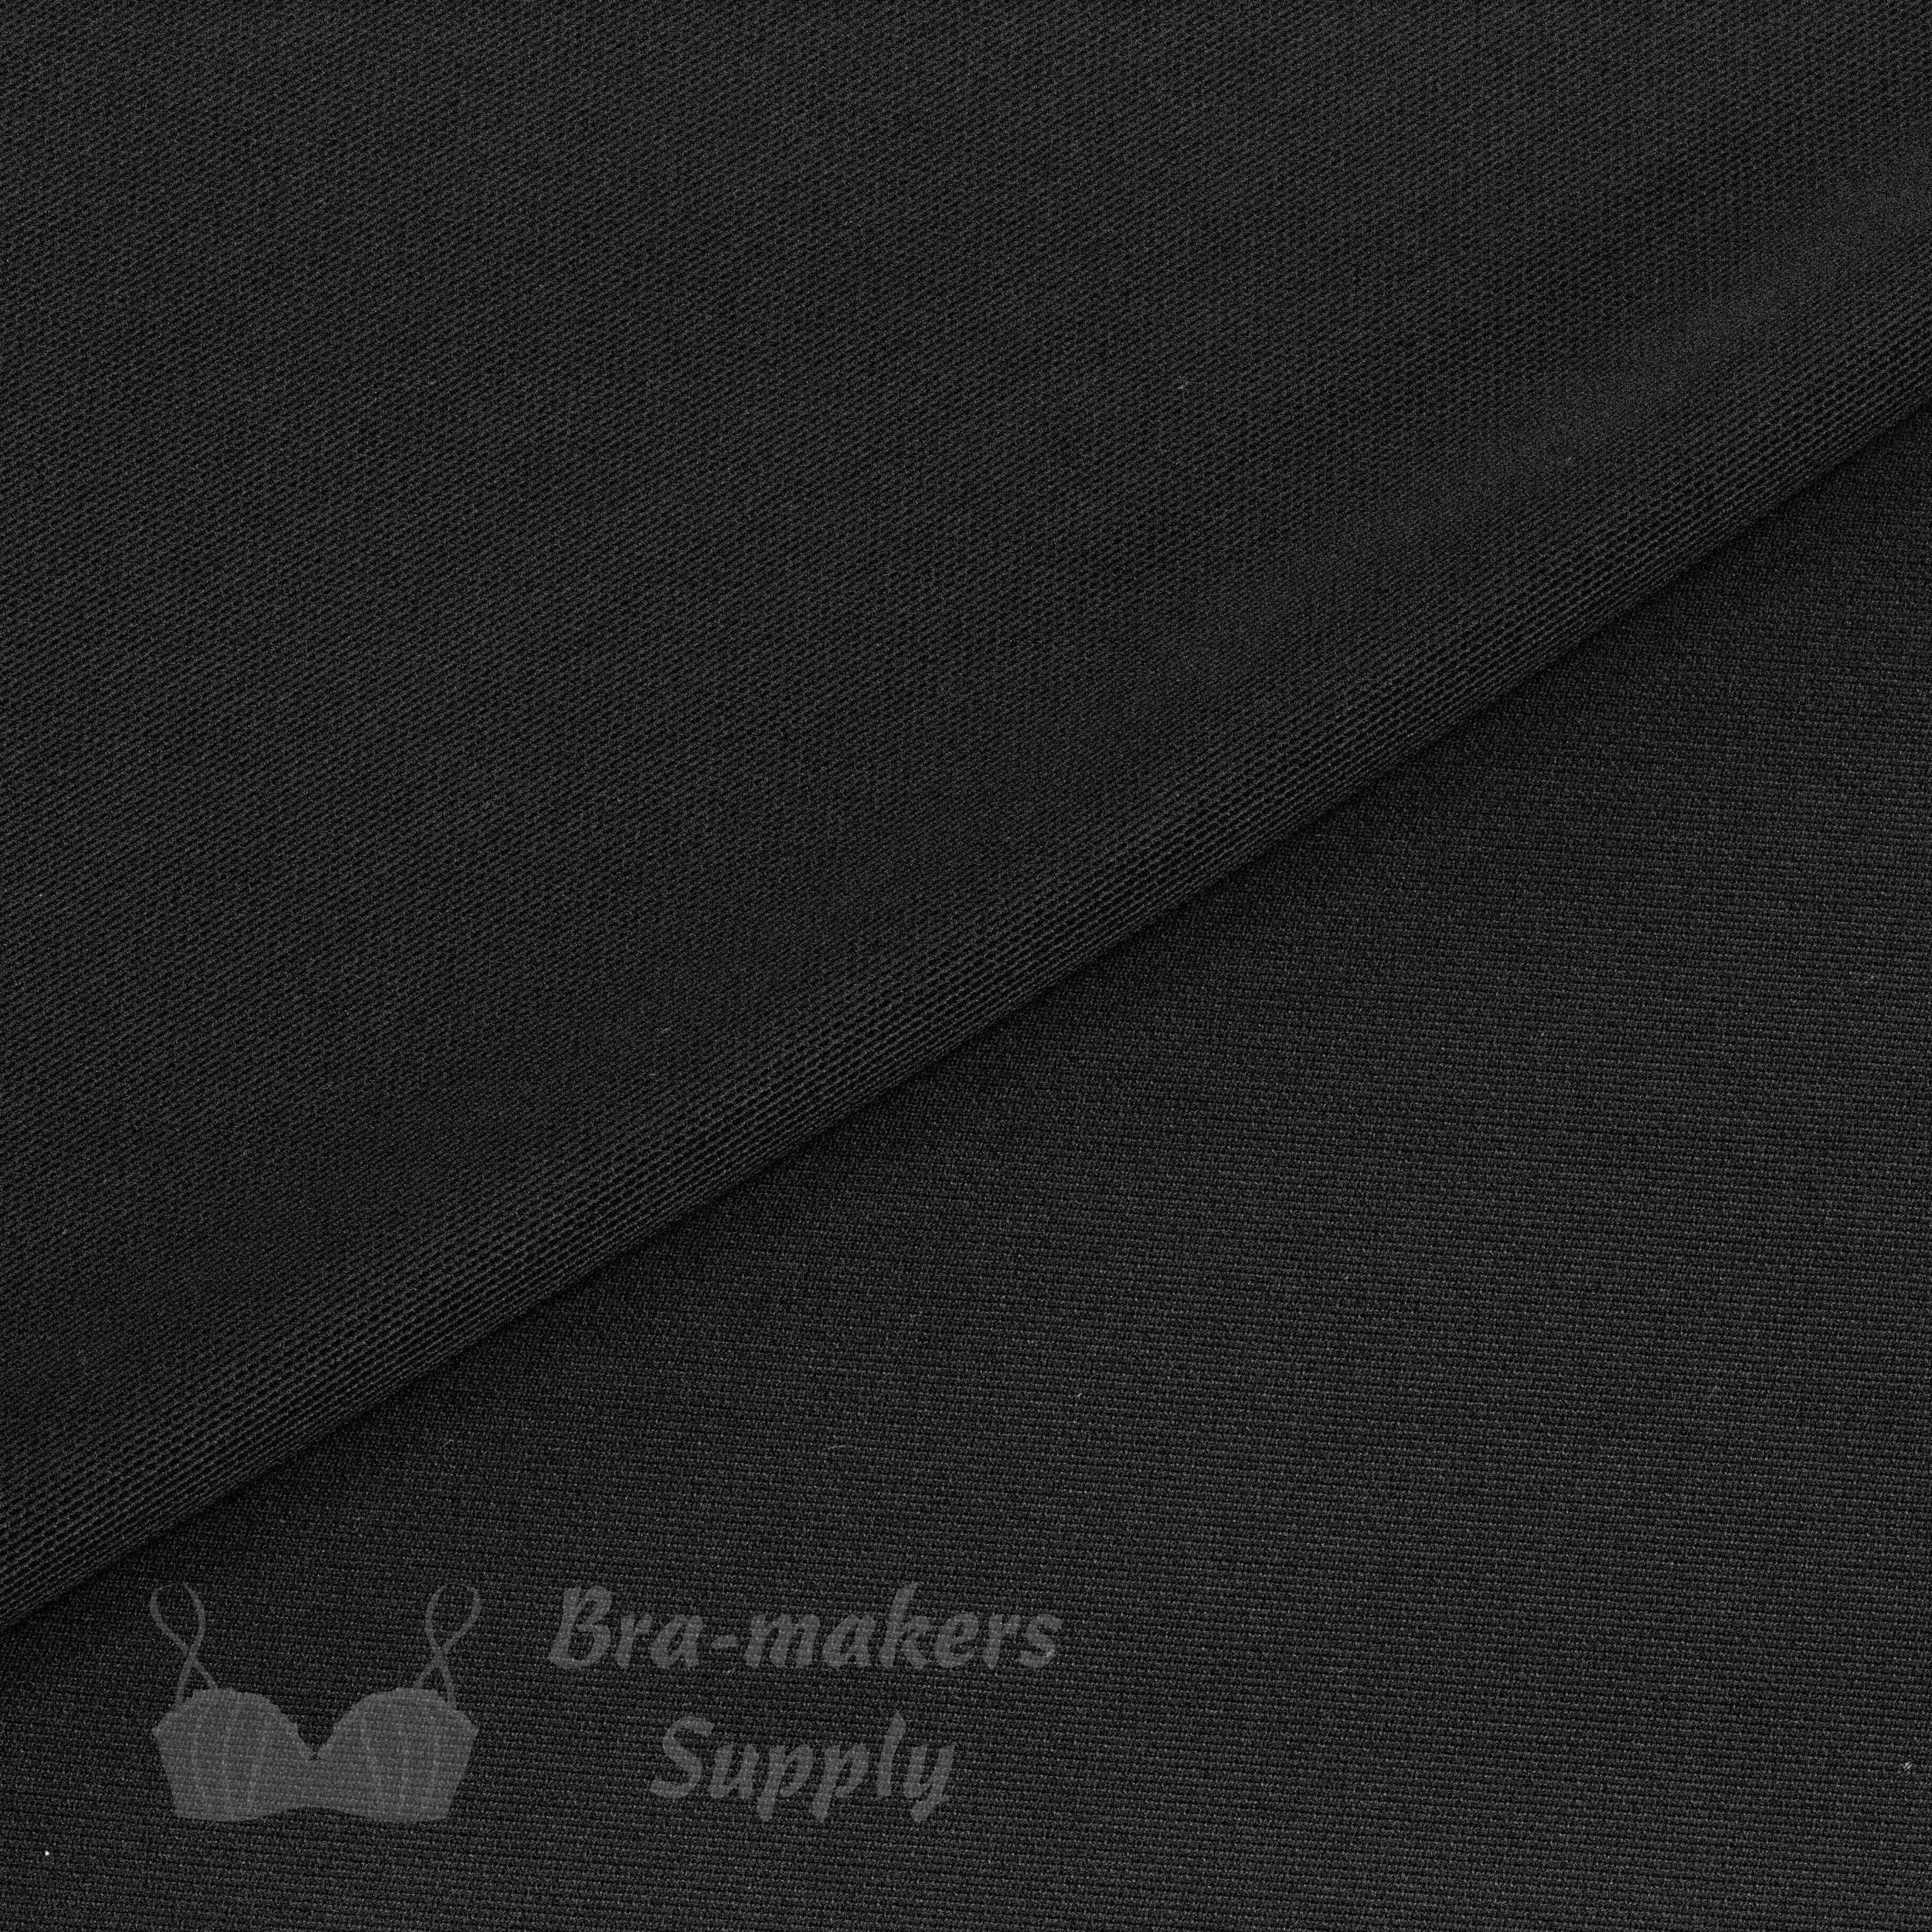 power net power mesh FP-1 black or stretch bra band wings fabric anthracite Pantone 19-4007 from Bra-Makers Supply folded